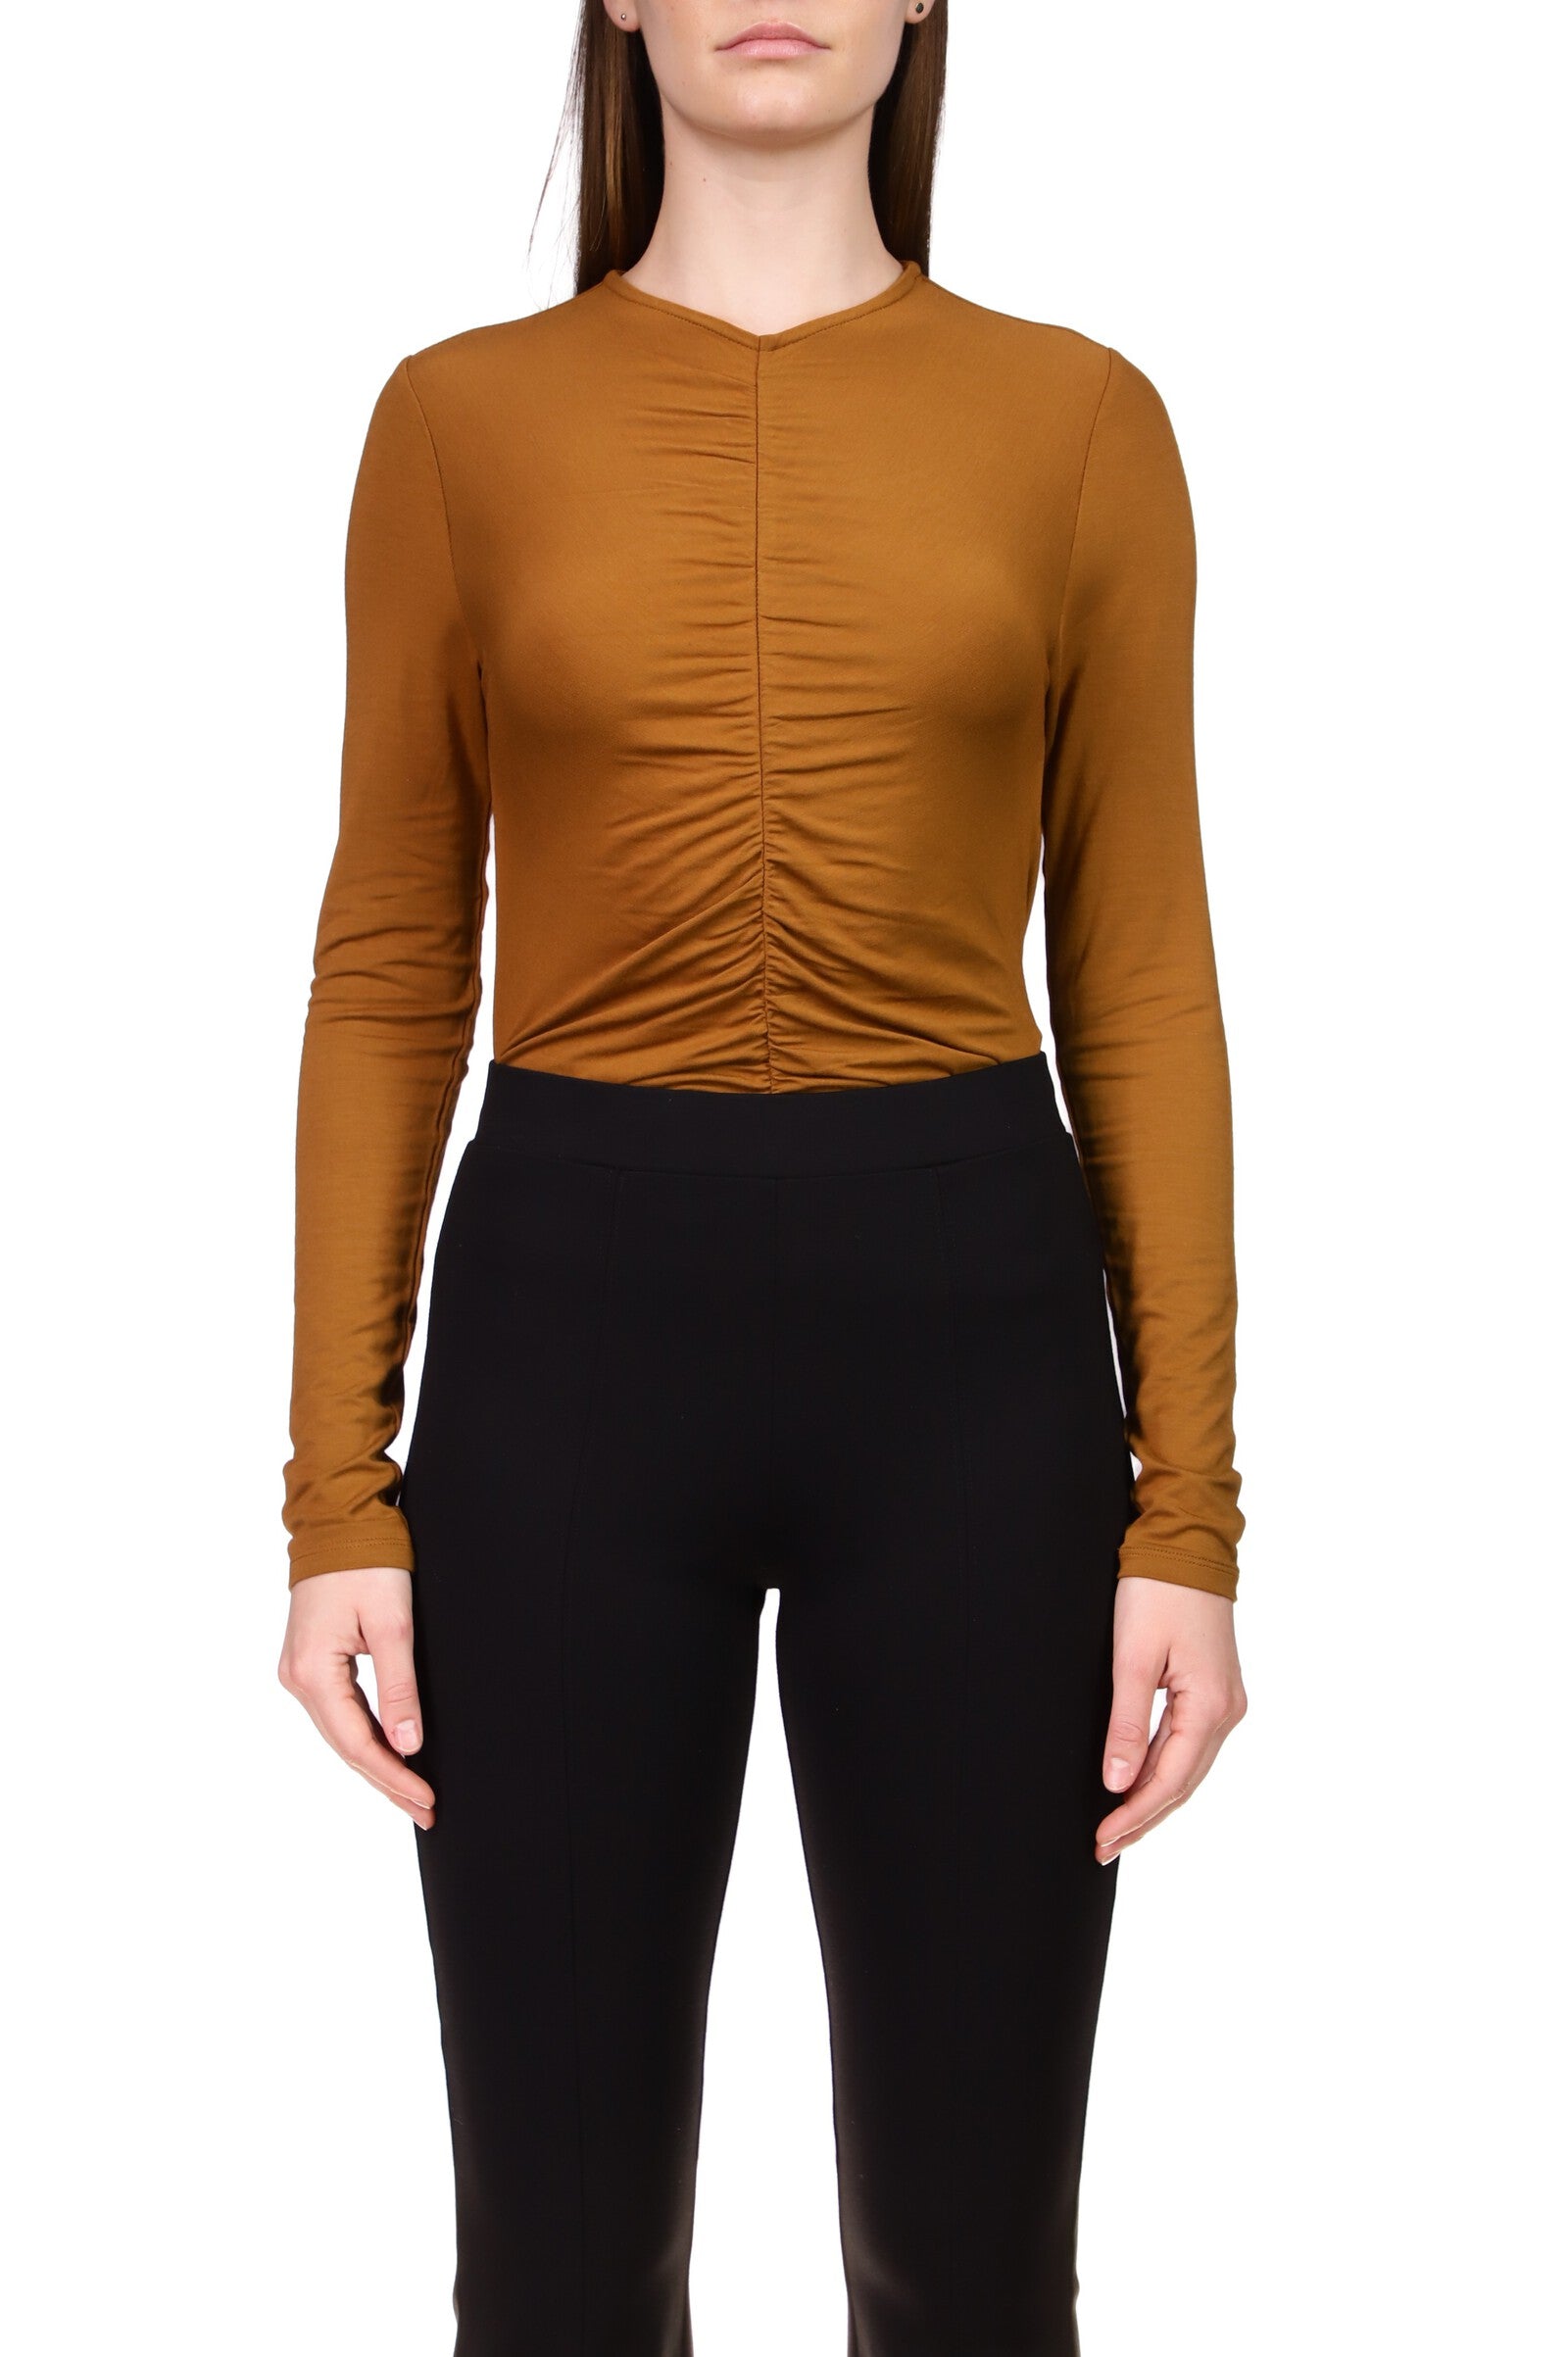 Long Sleeve Ruched Top - Spice